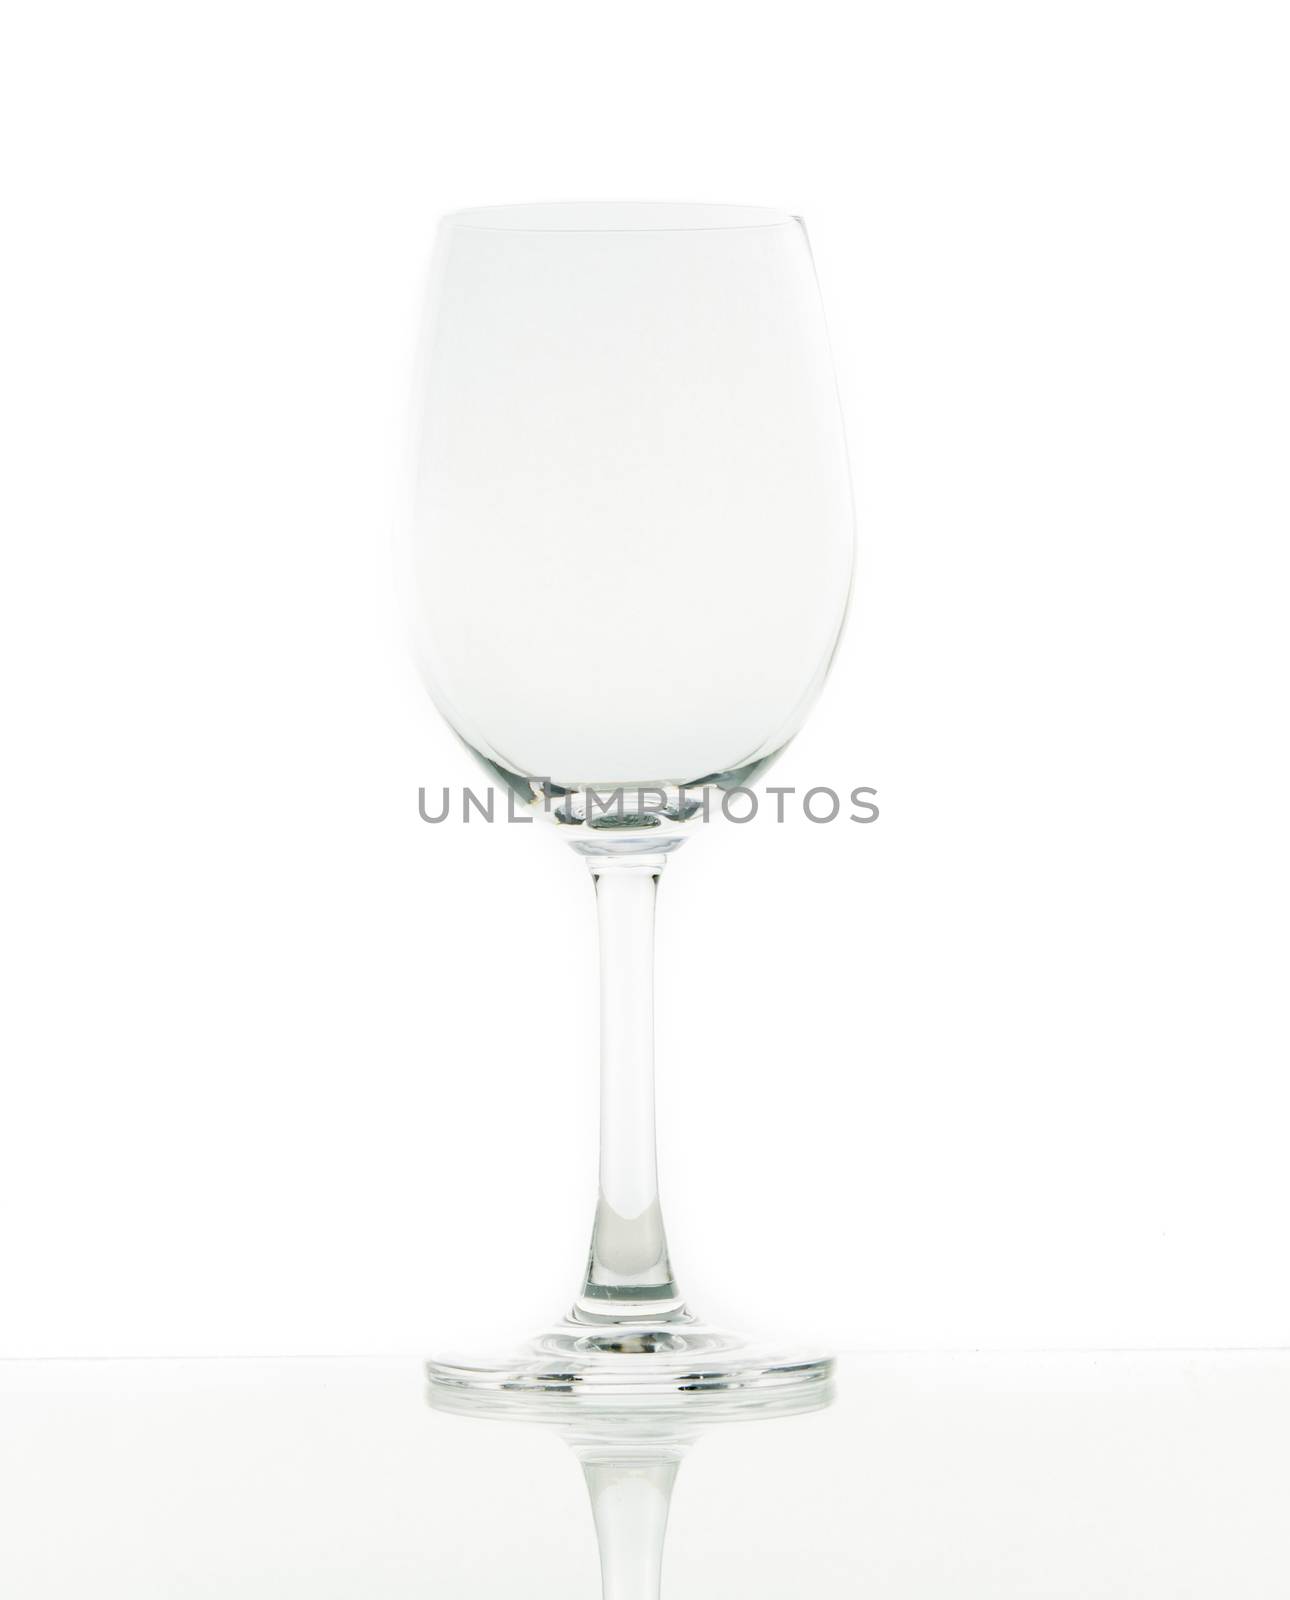 Glass water clear isolate on over white background